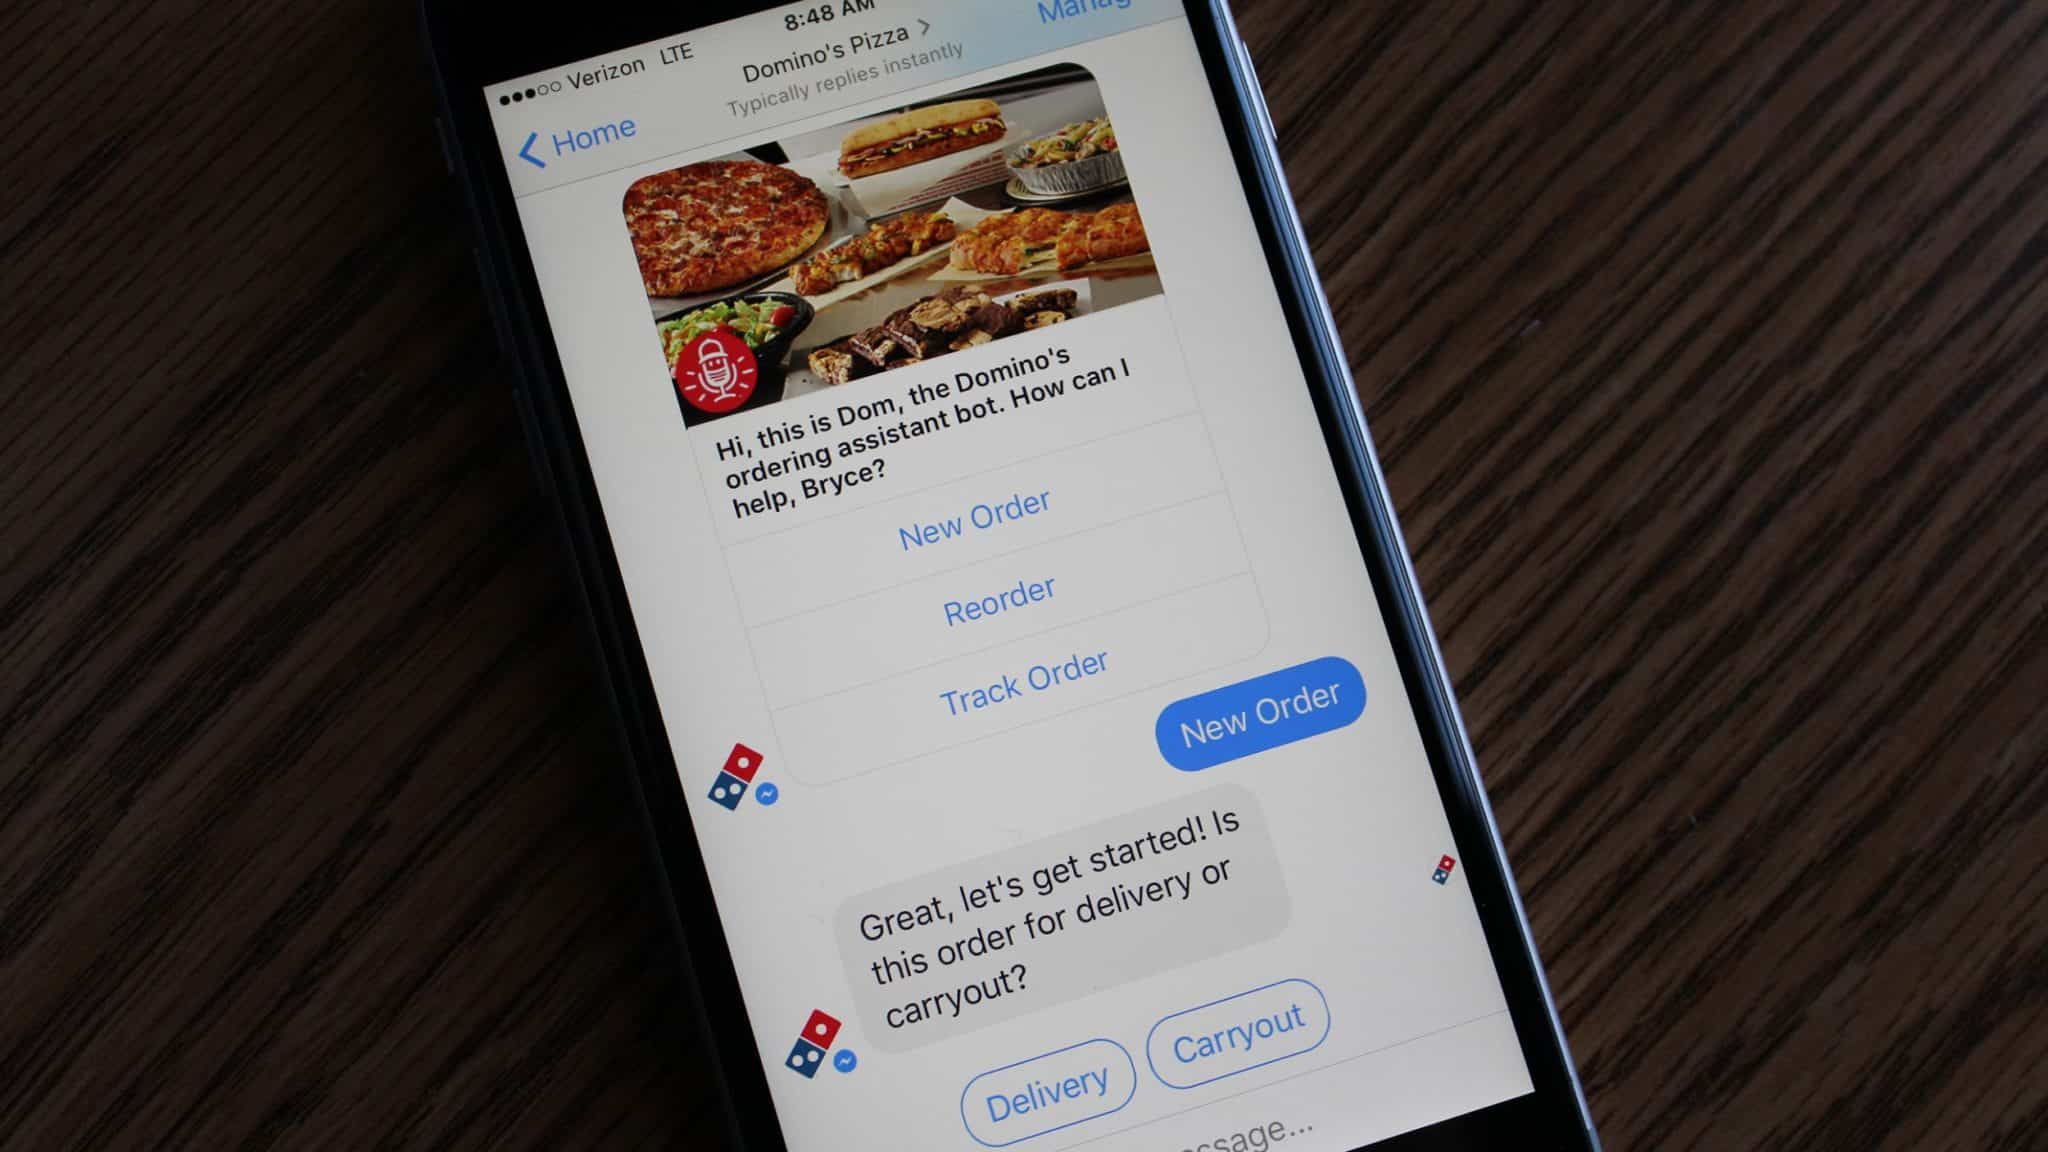 Domino's pizza chatbot